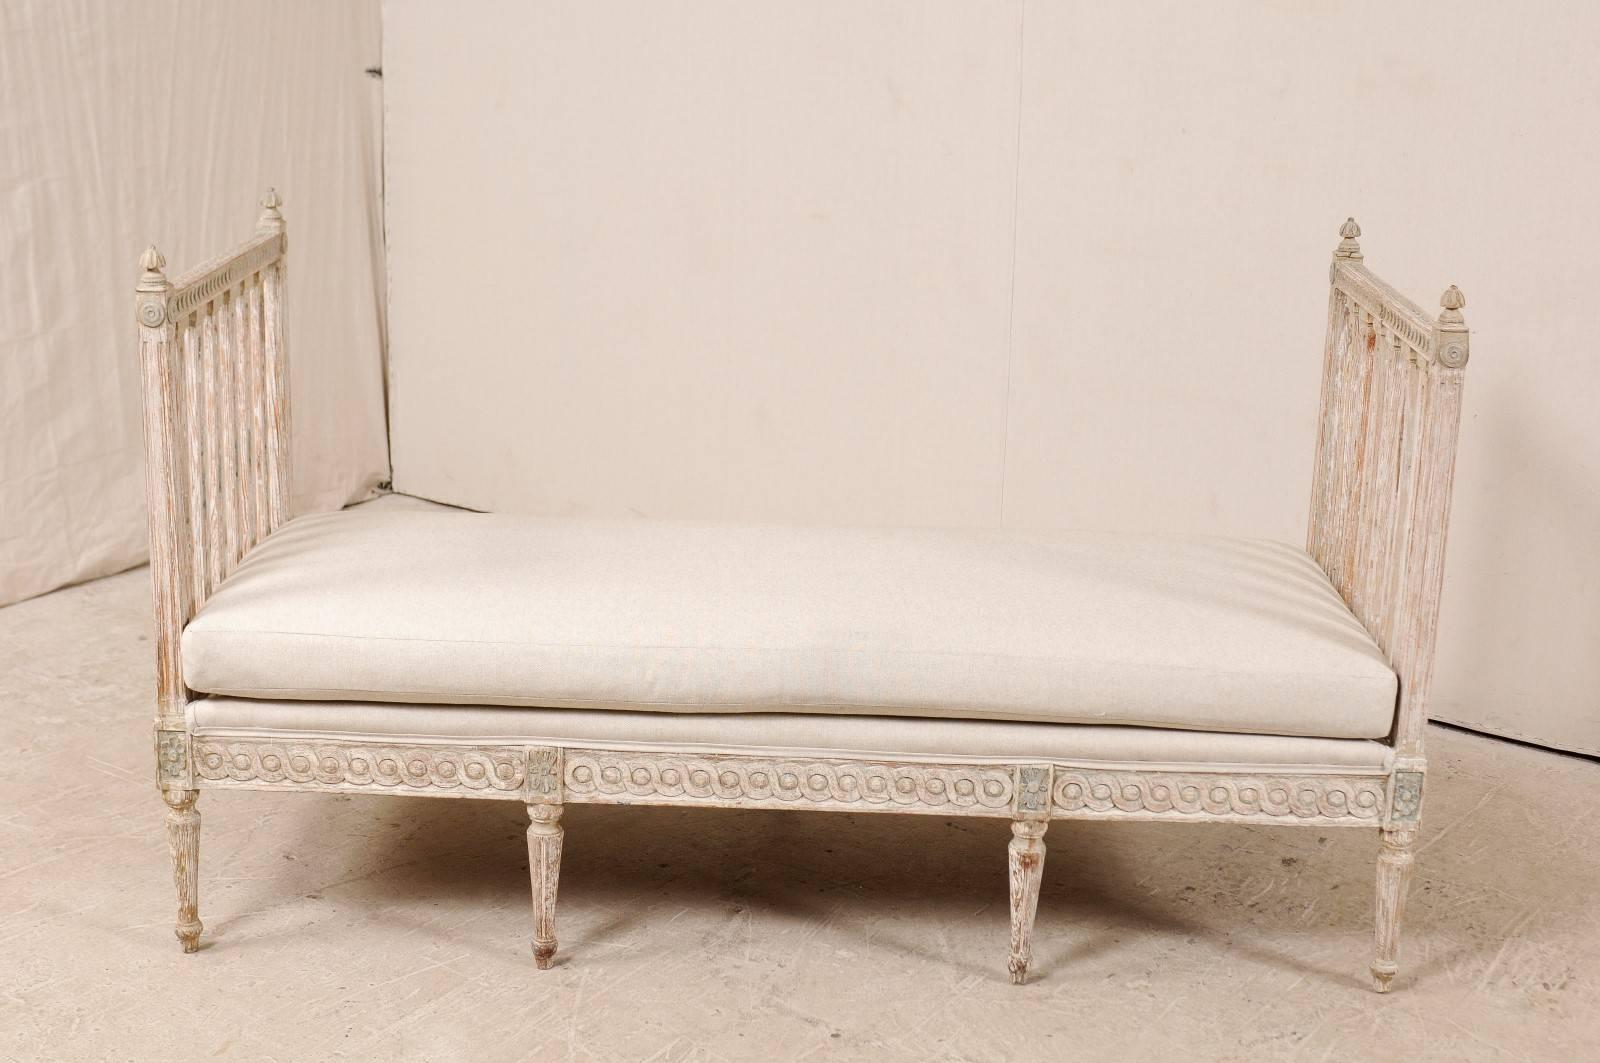 A Swedish period Gustavian daybed or sofa bench from the late 18th or early 19th century. This Gustavian daybed features high splat sides, attractively carved like pierced columns, and flanked with a decorative finial at each side post. There are